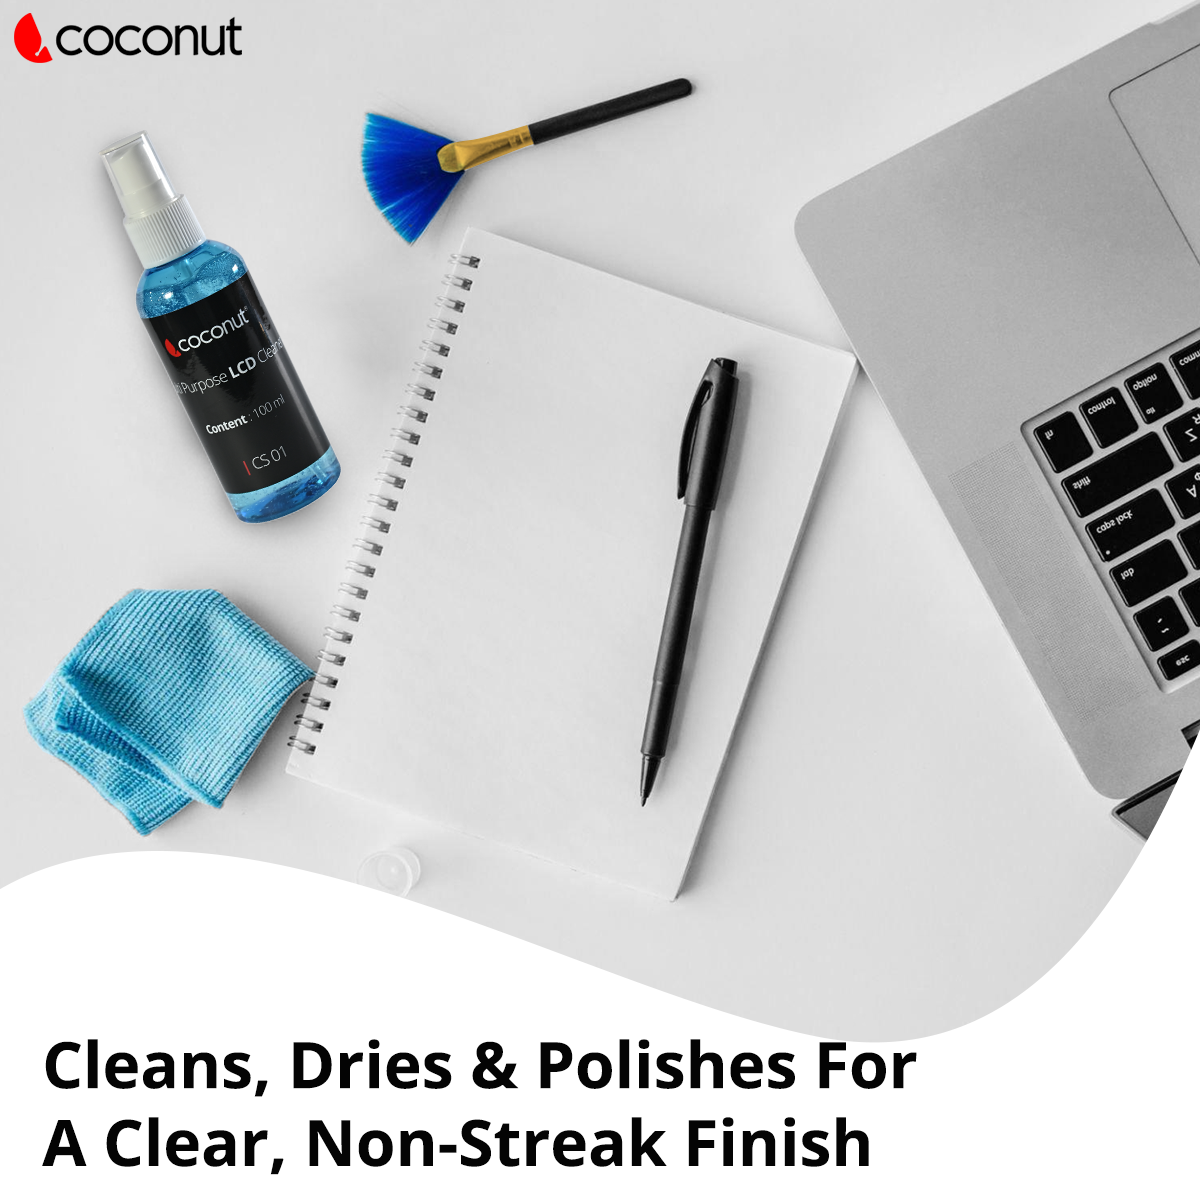 CS01 - 3 in 1 Cleaning Kit